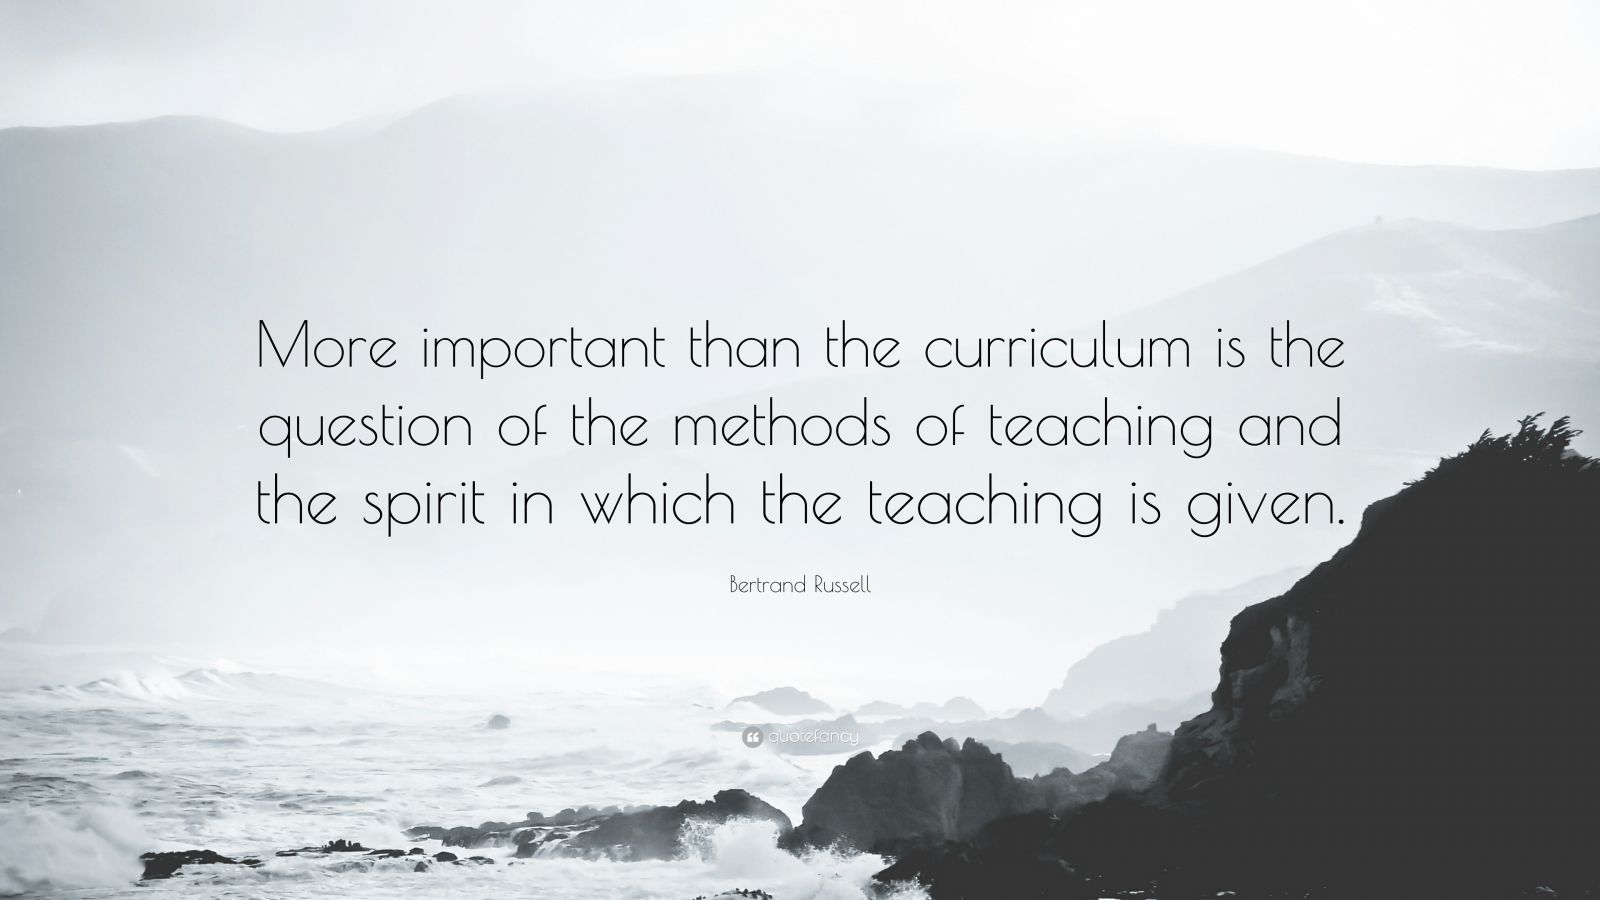 Bertrand Russell Quote: “More important than the curriculum is the